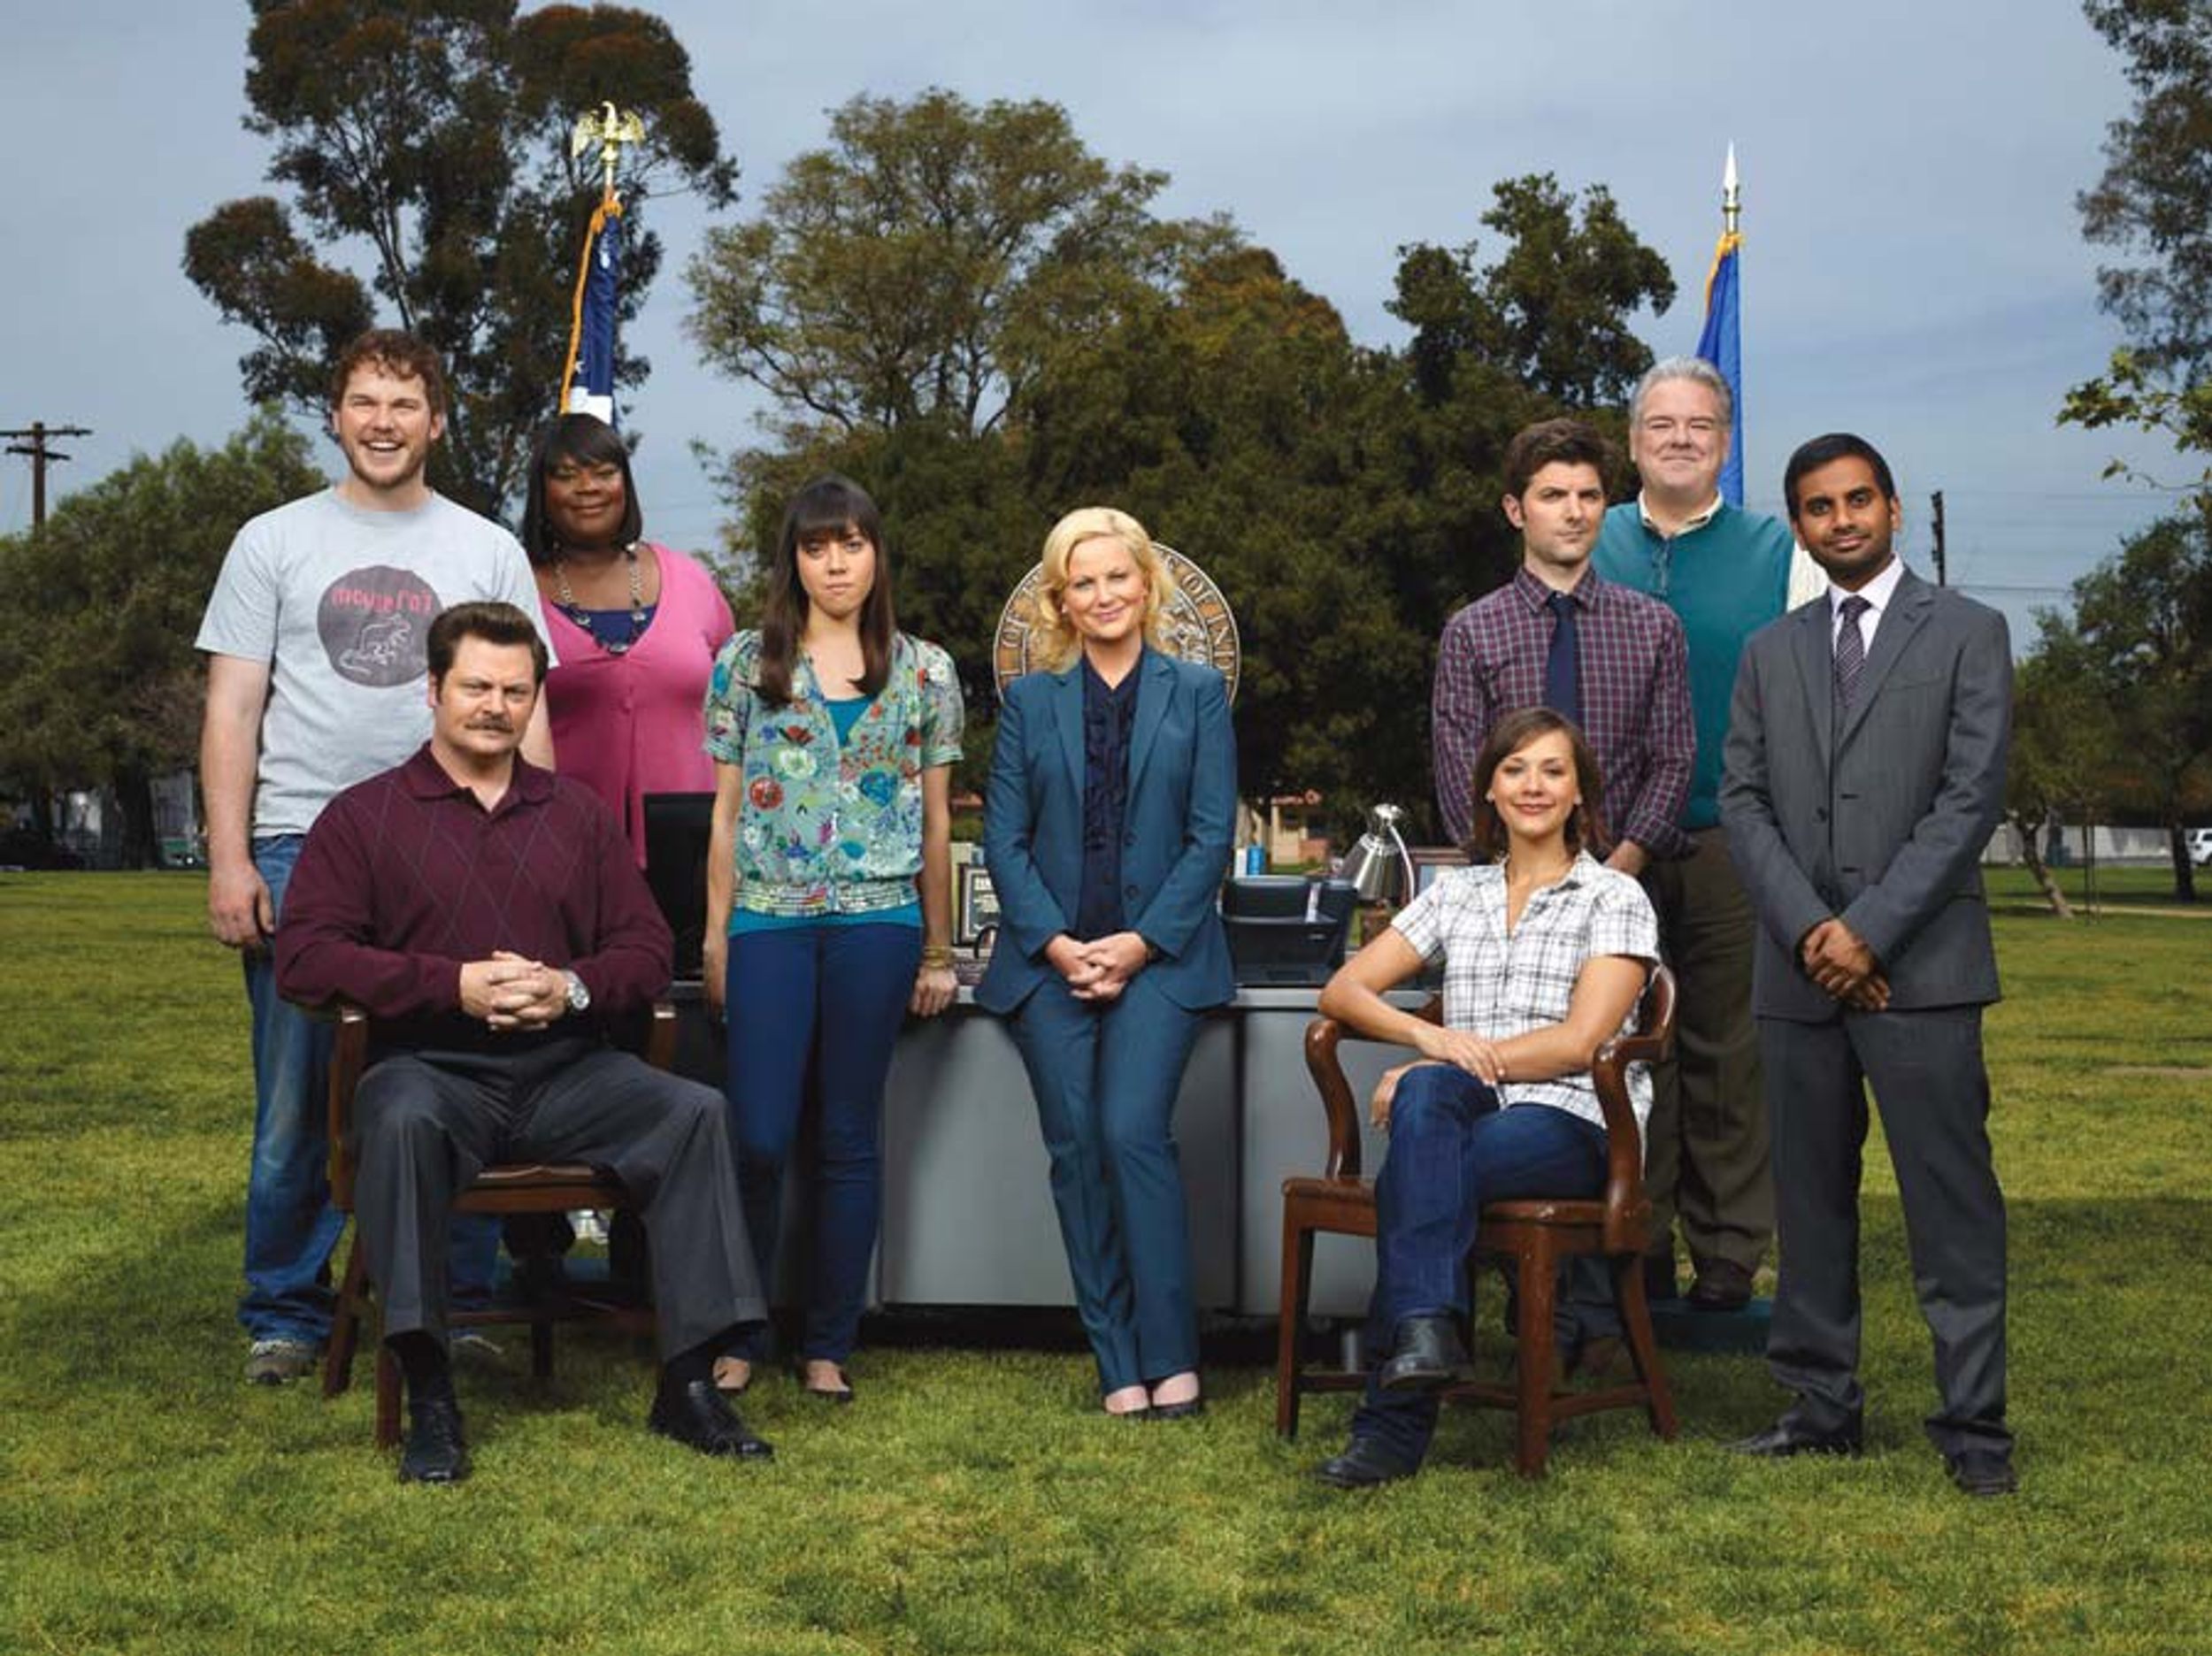 The 2016 Election As Told By Parks And Recreation